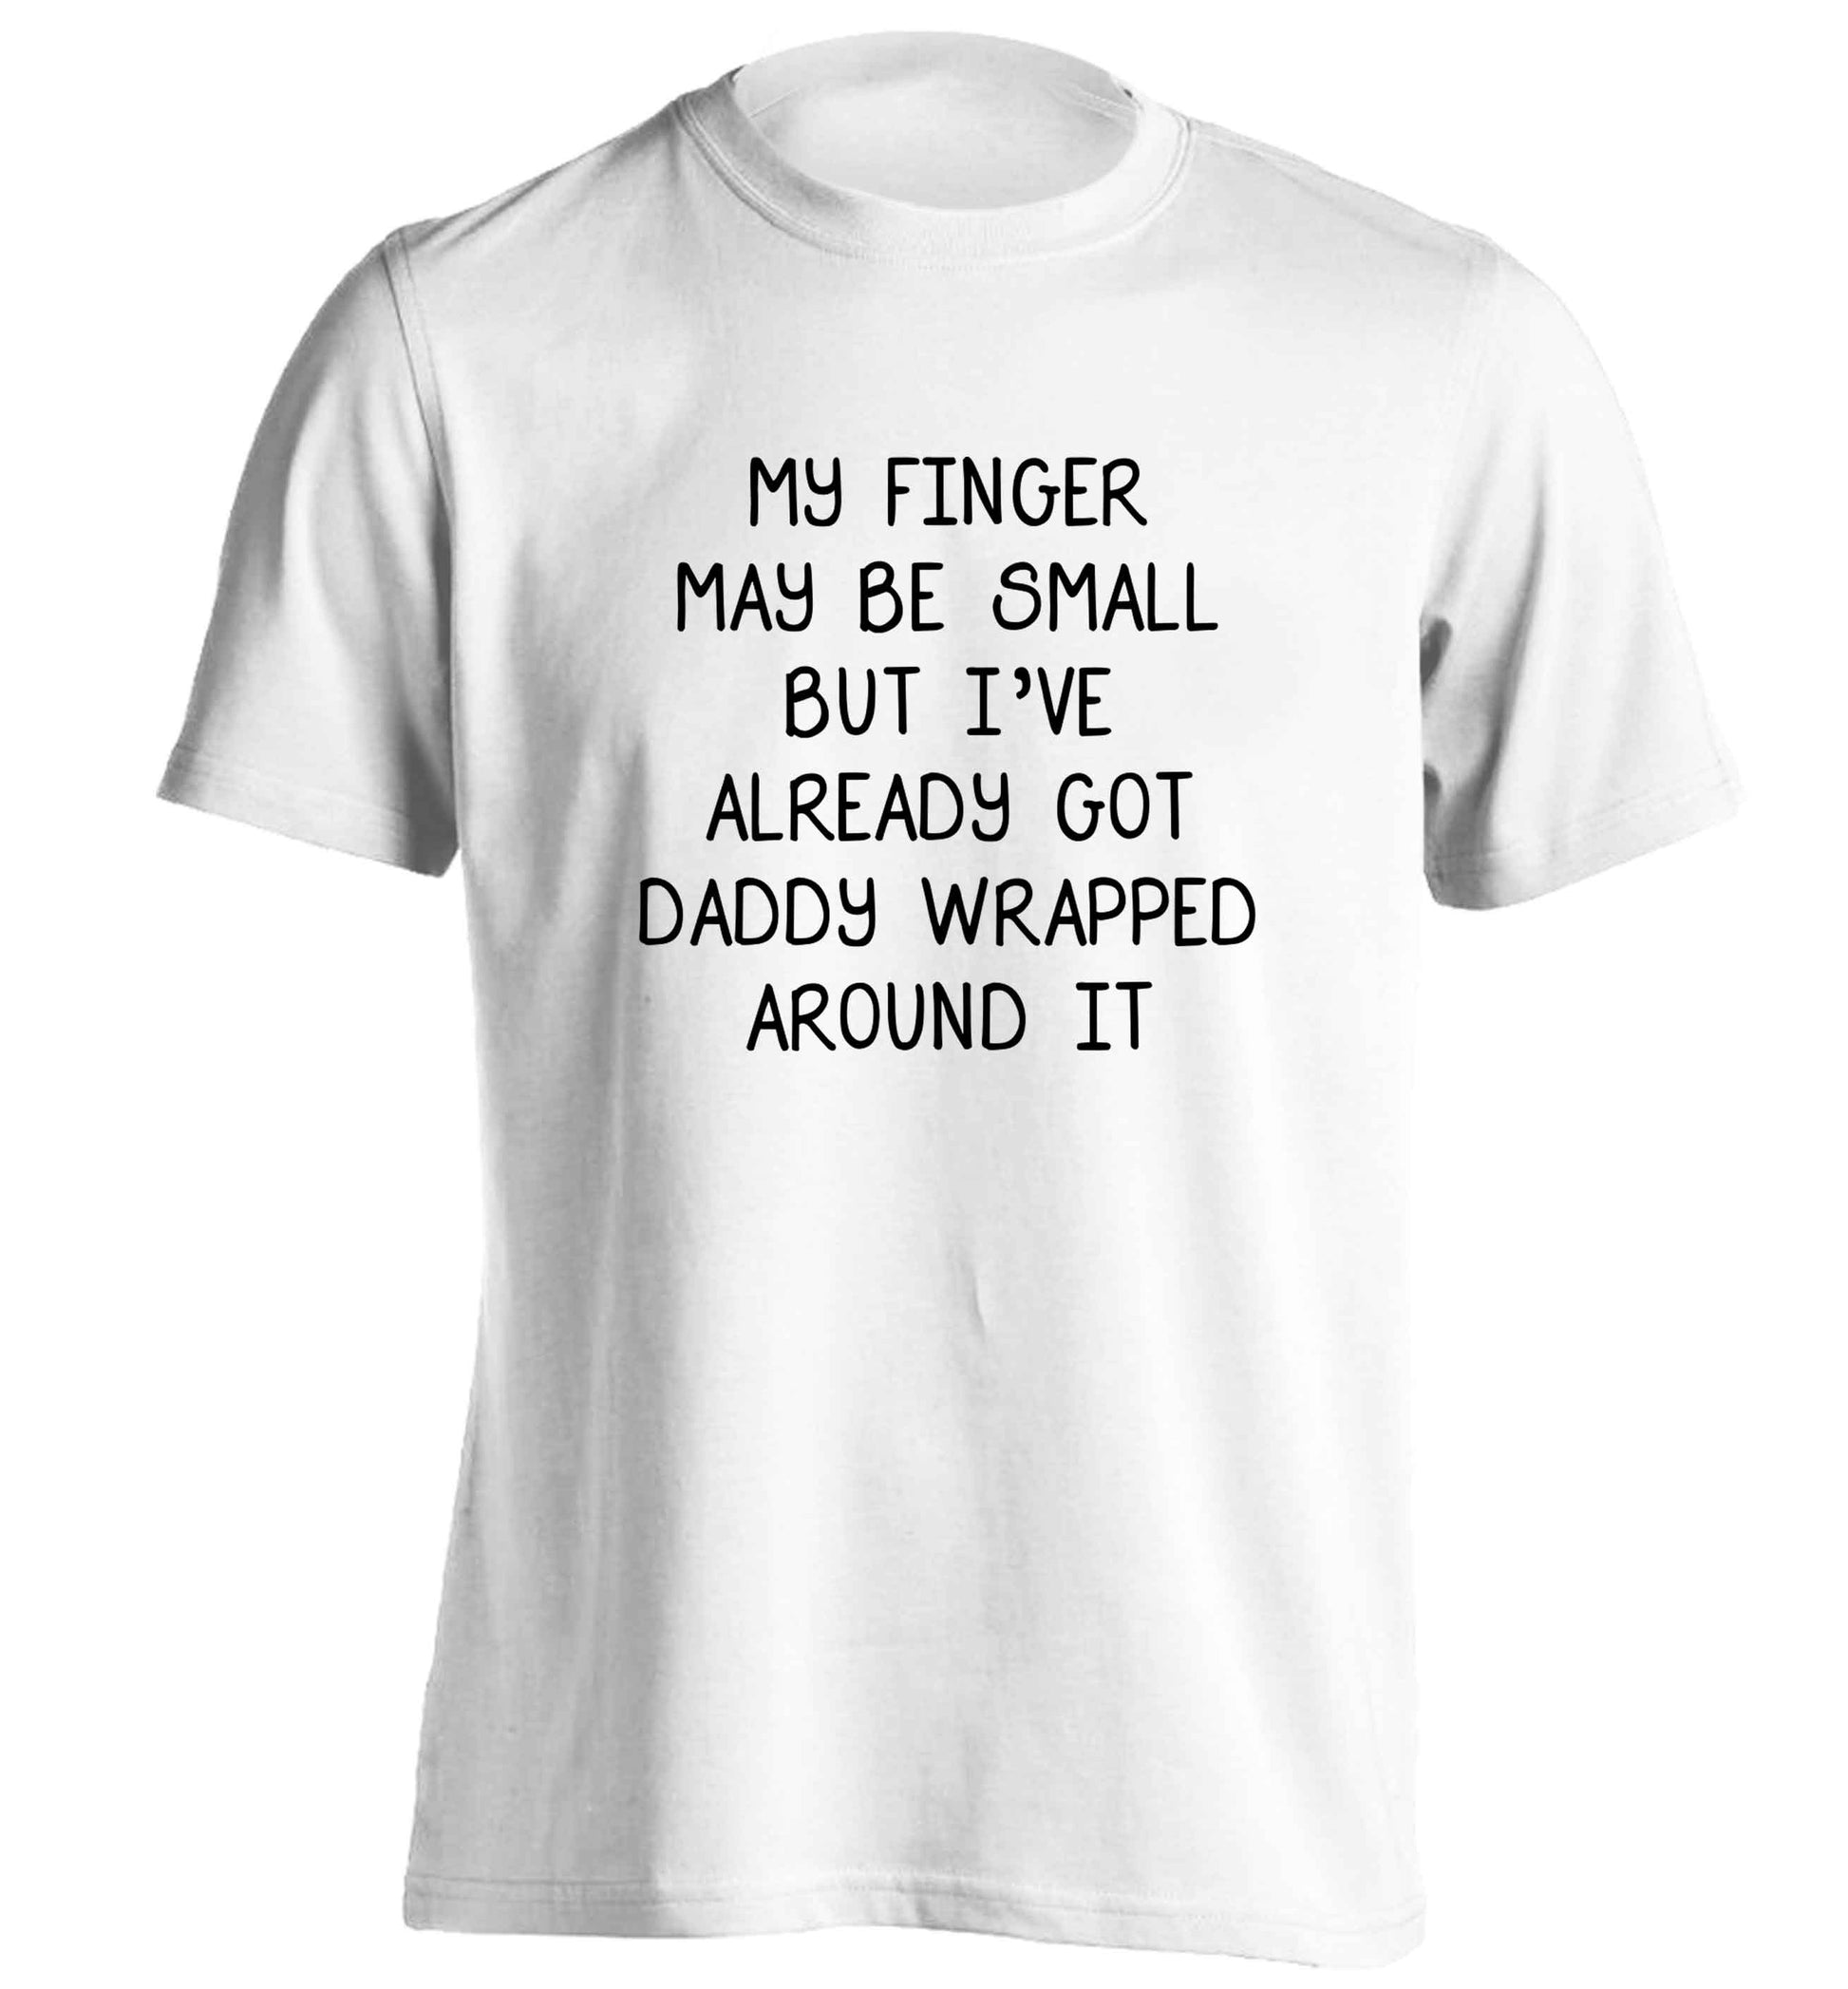 My finger may be small but I've already got daddy wrapped around it adults unisex white Tshirt 2XL